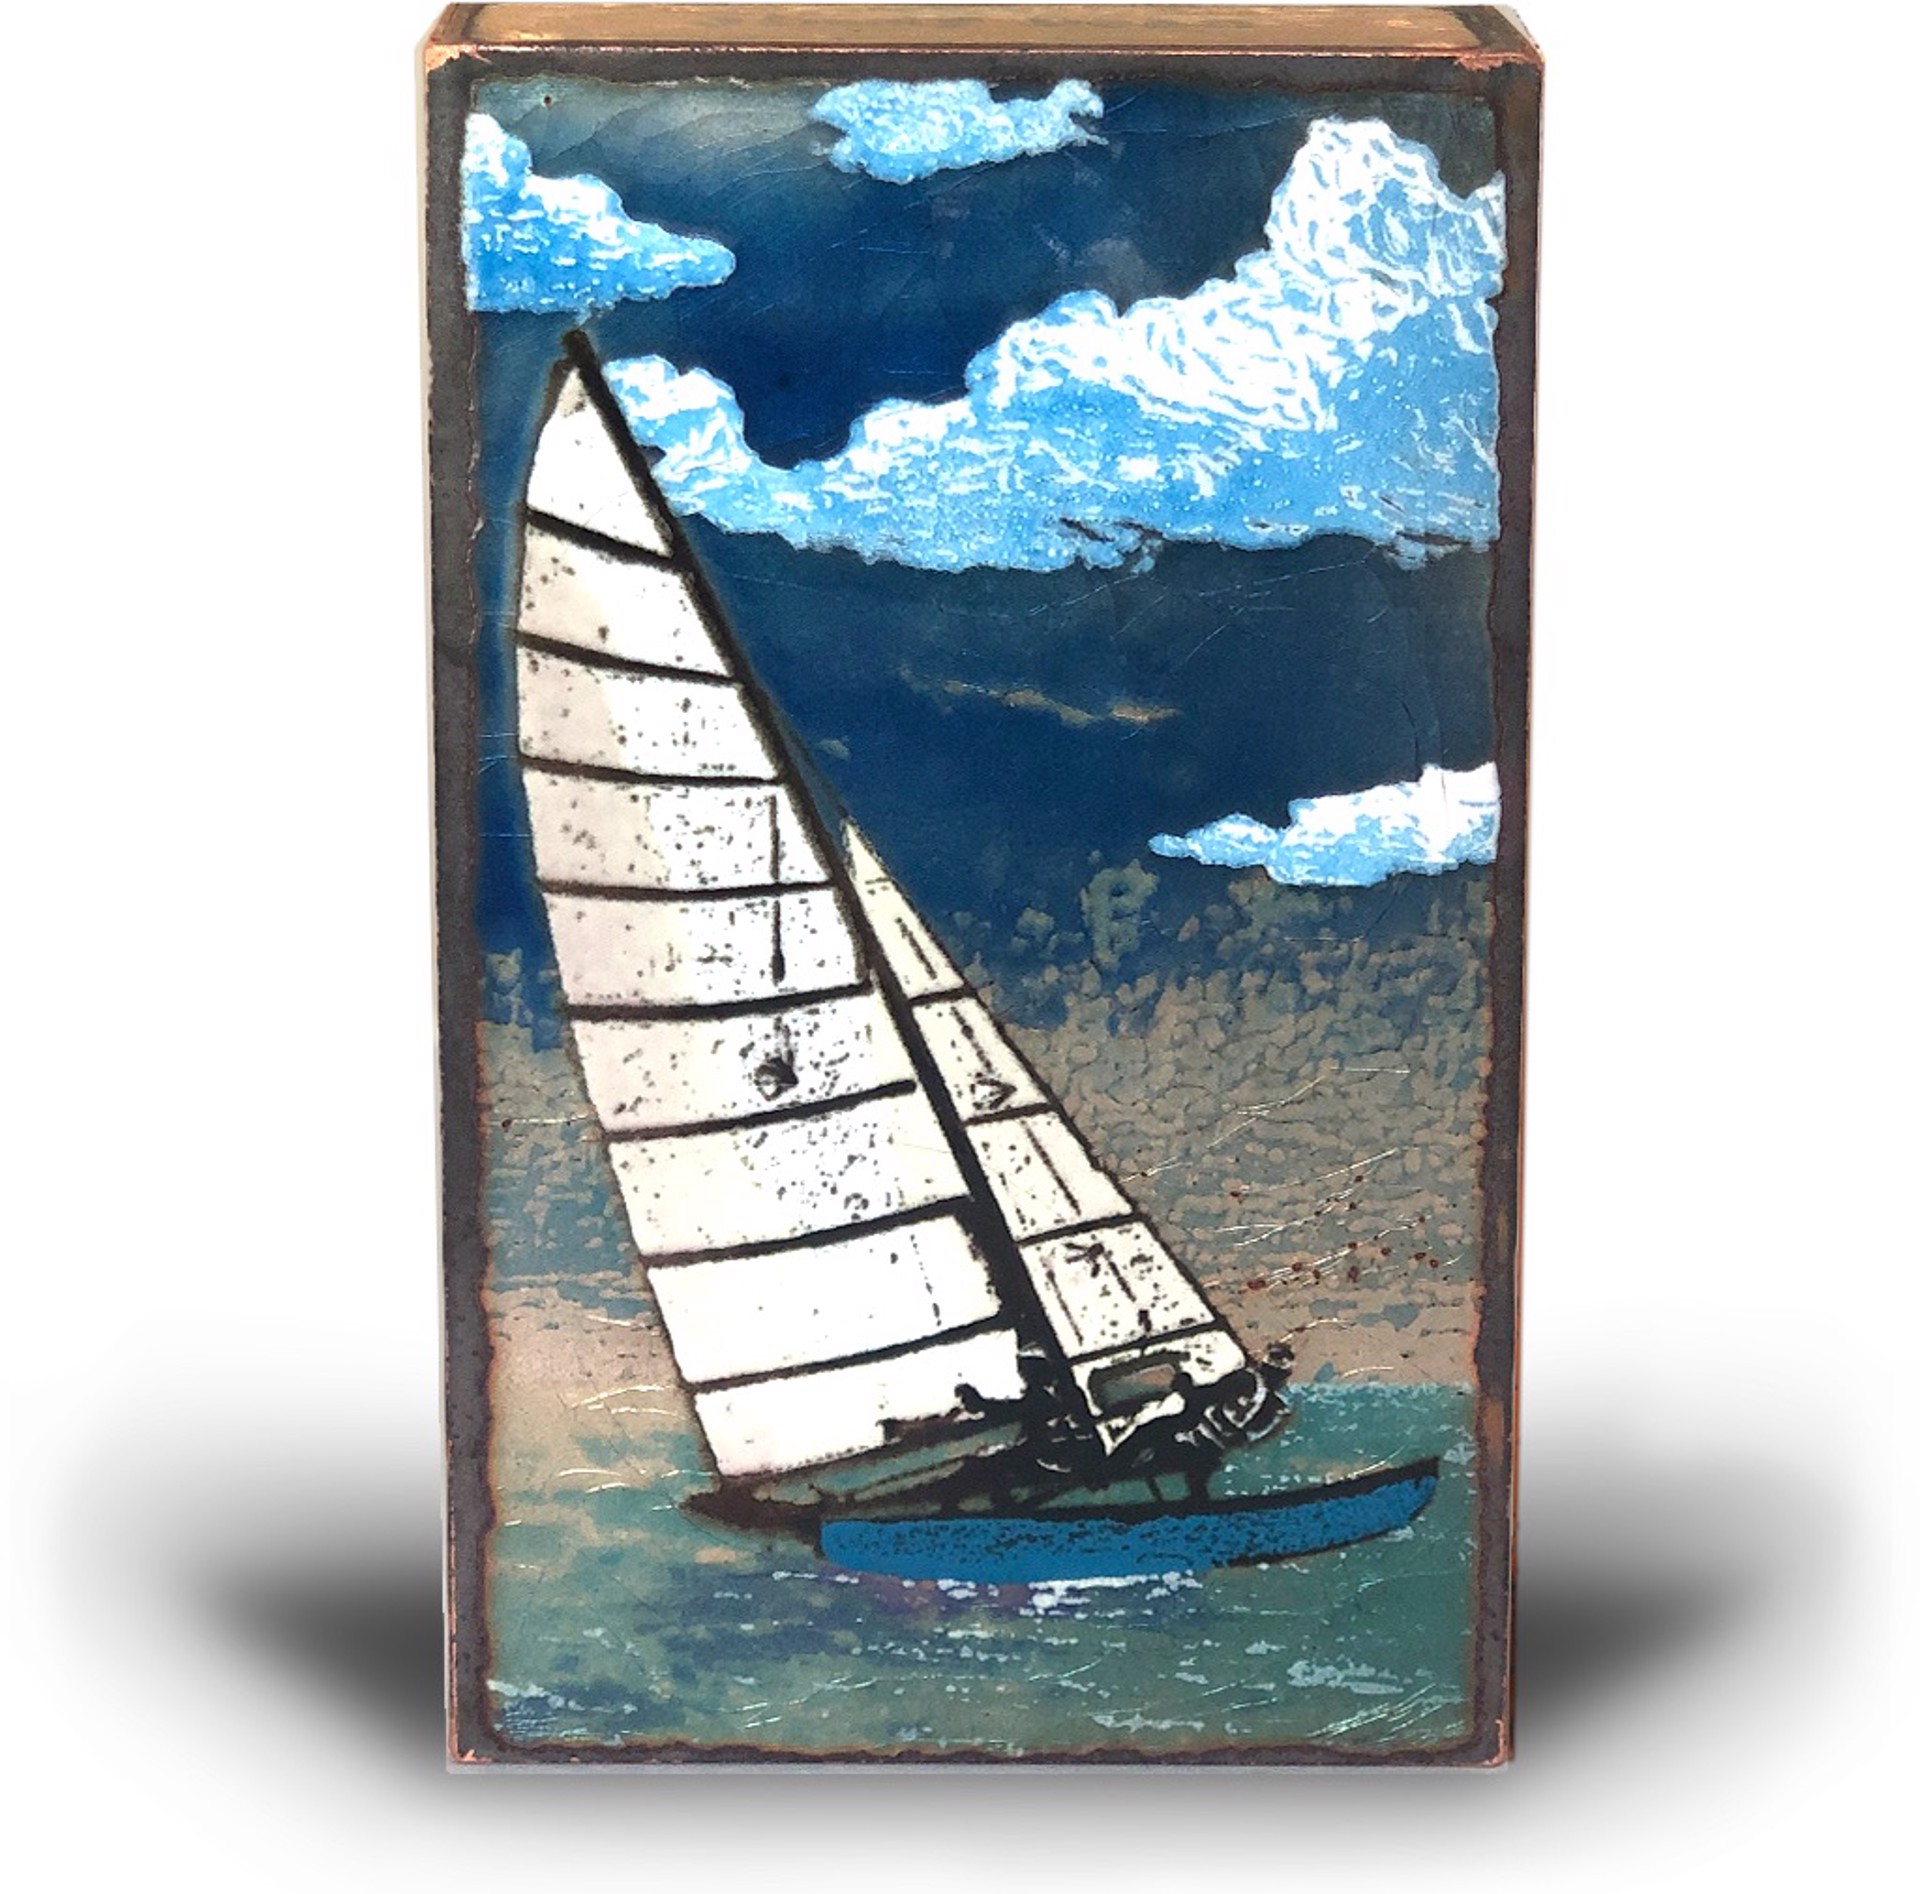 Hand Made Glass Fired To Copper By Houston Llew Featuring Sailboat And Meaningful Quote, Available At Gallery Wild